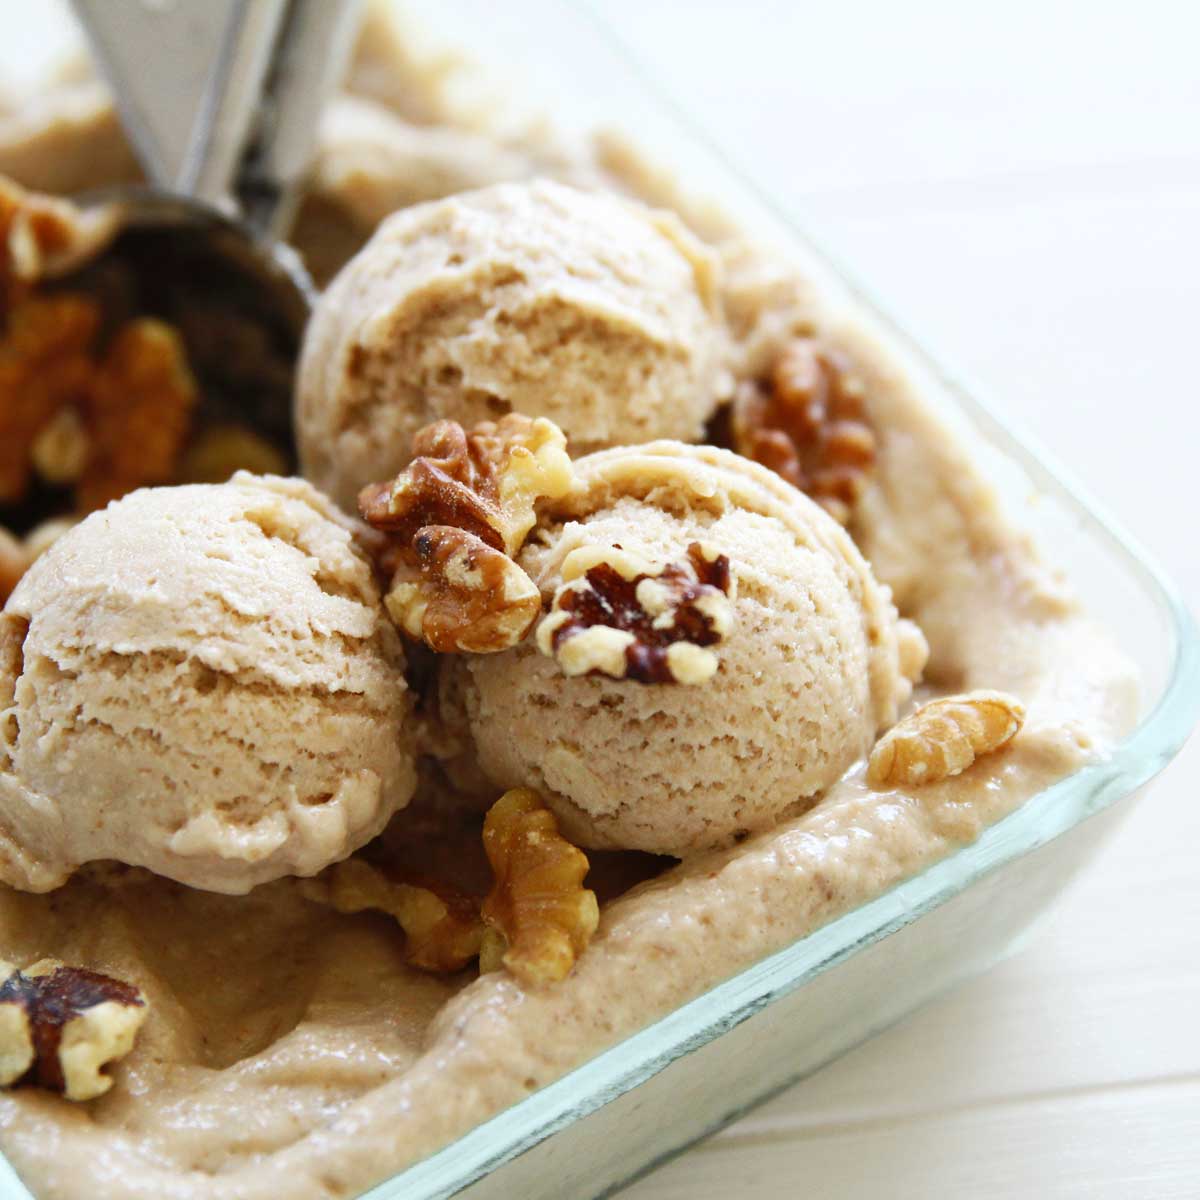 Maple Walnut Nice Cream (Made in the Food Processor) - Sweet Potatoes in the Microwave